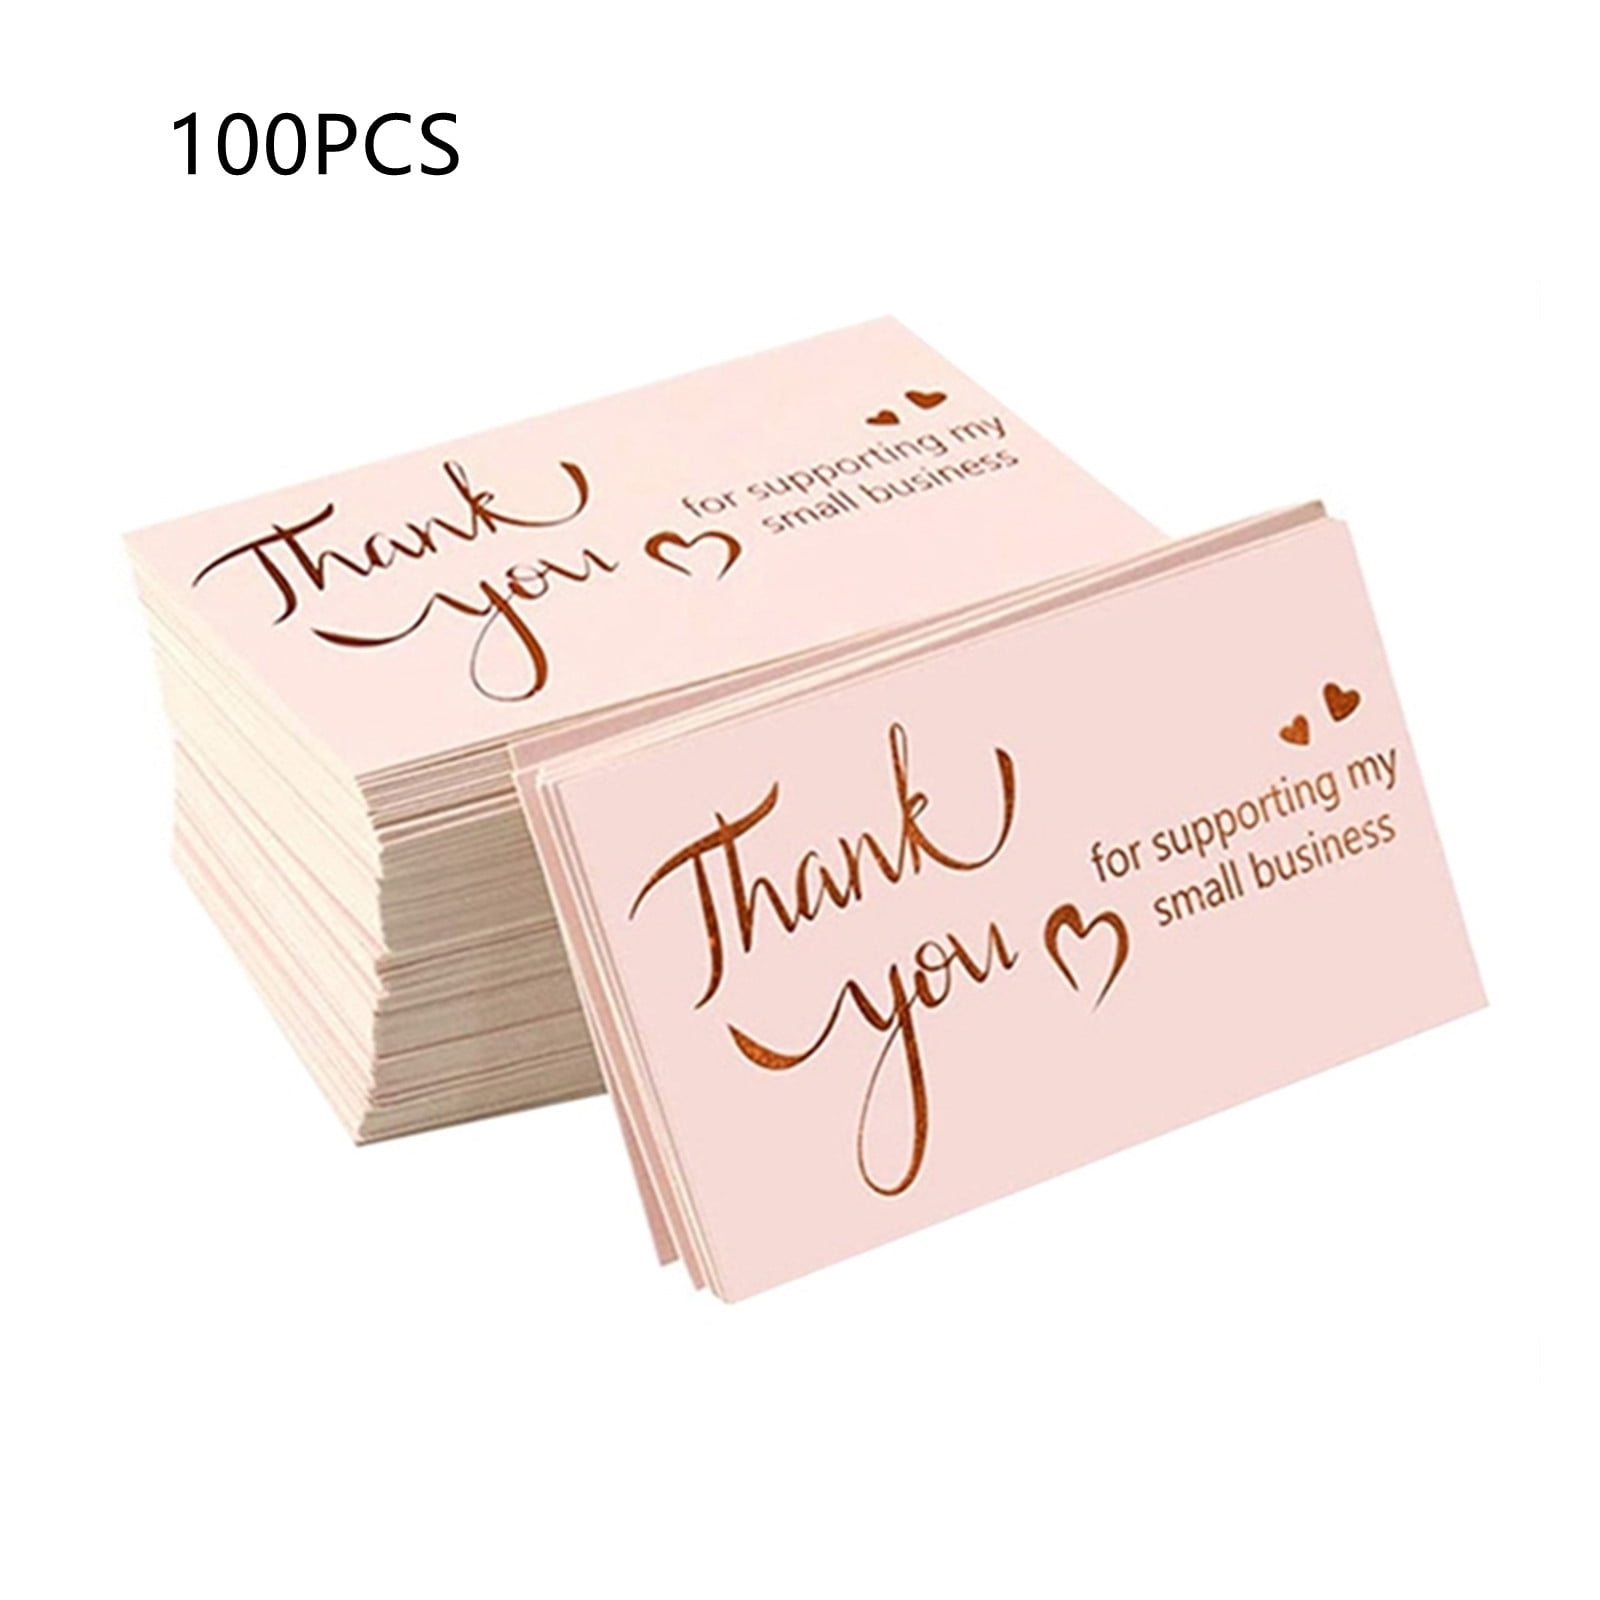 6 Colors 3.5x2inch Thank You Packaging Insert Thank You Cards KP-019 ZCMY Thank You Cards for Supporting My Small Business 